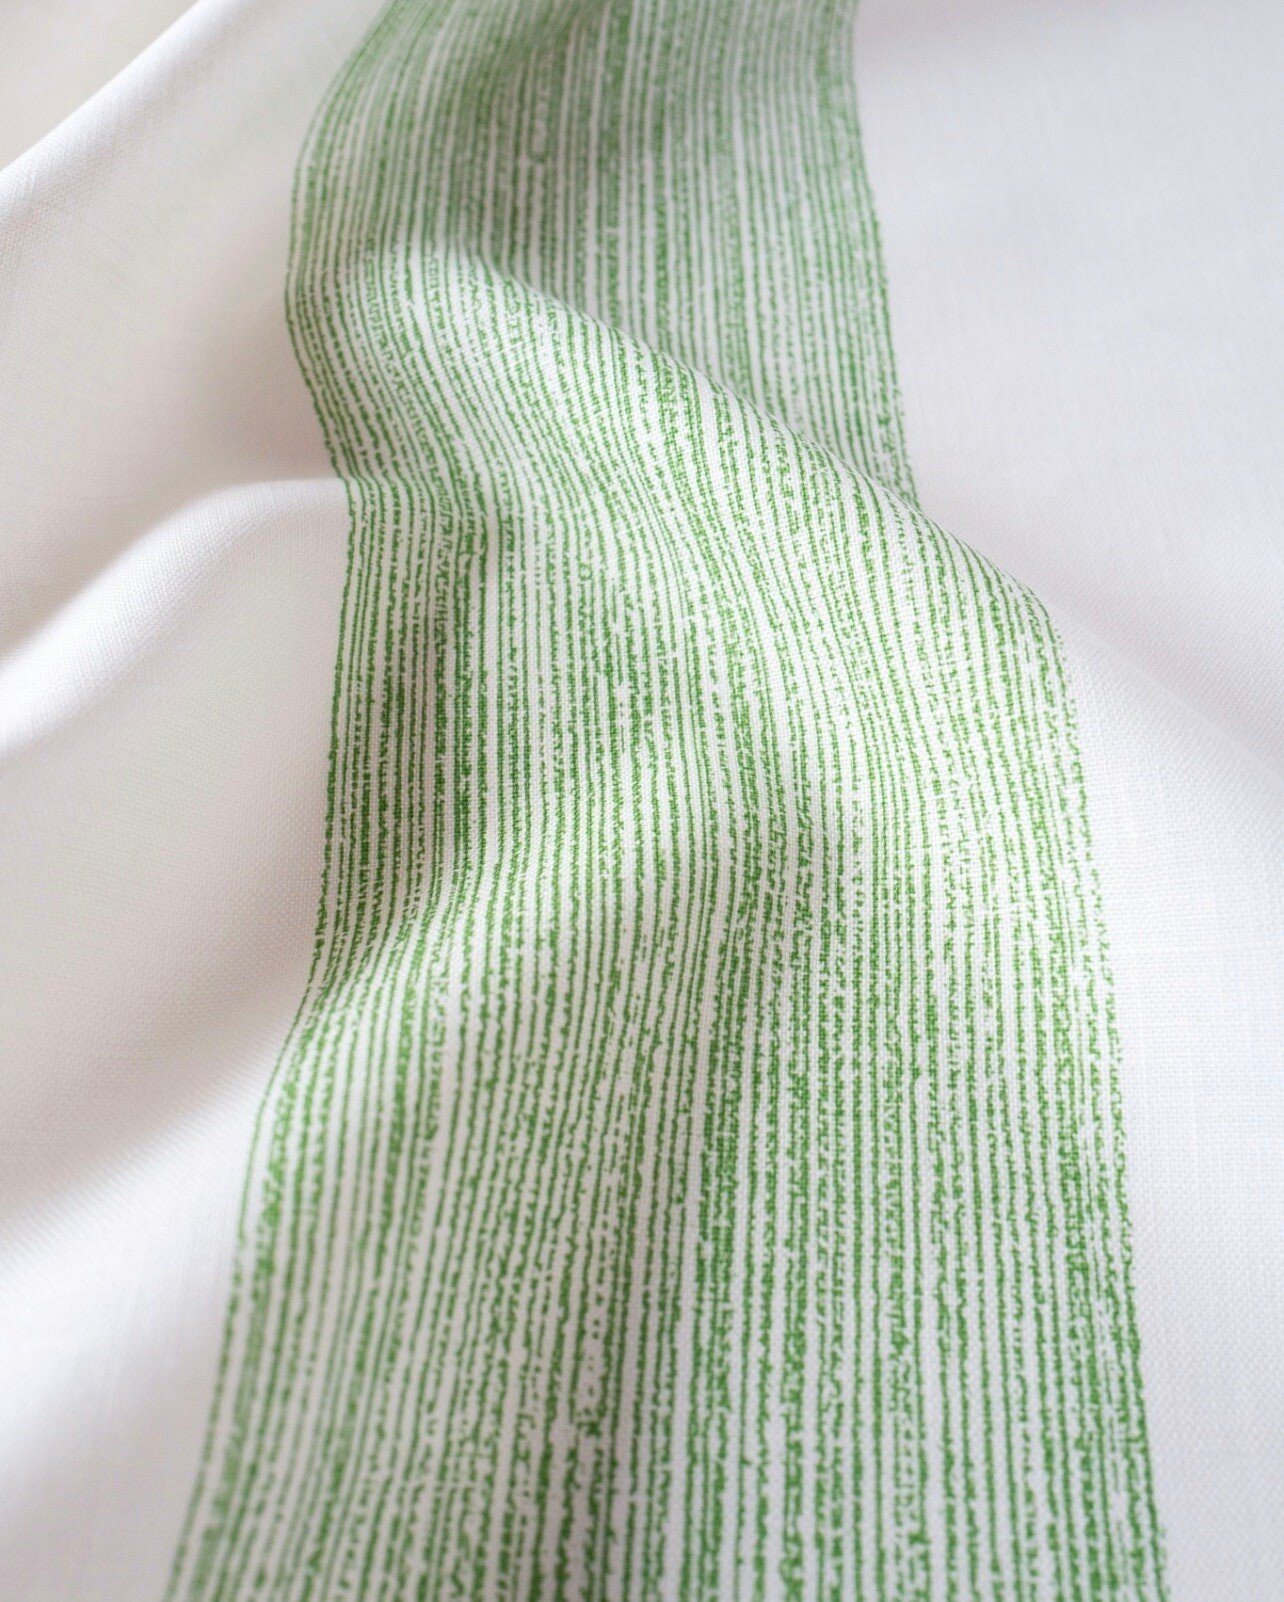 From a distance, the pattern appears as a simple stripe, but with a closer look, the details are nuanced and delicate.